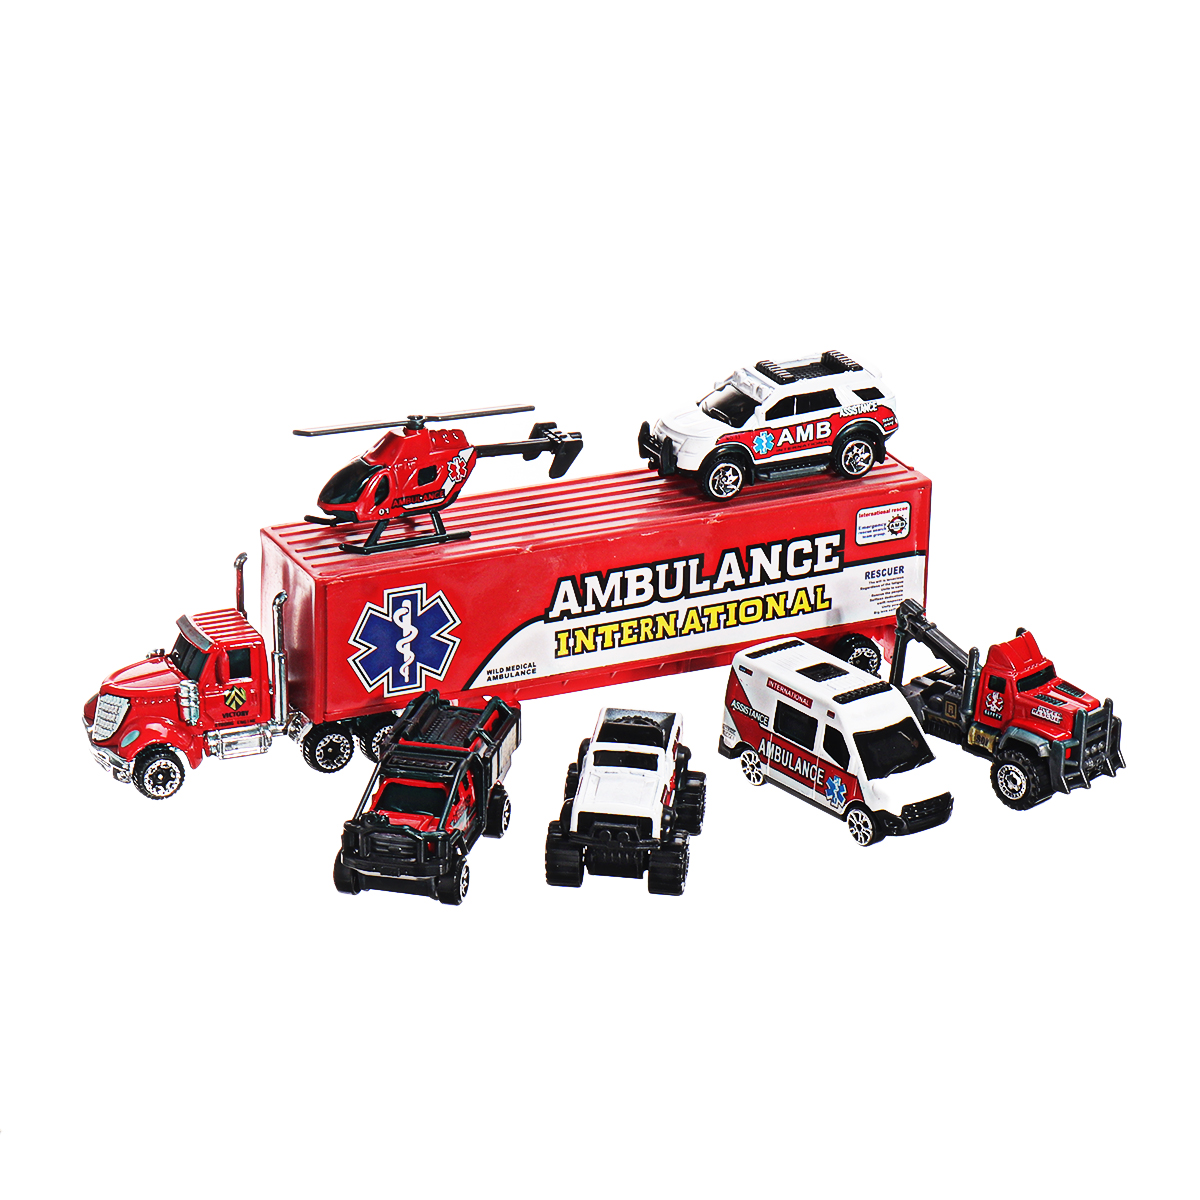 7-PCS-Alloy-Plastic-Diecast-Engineering-Vehicle-Ambulance-Polices-Car-Model-Toy-Set-for-Children-Gif-1769432-10